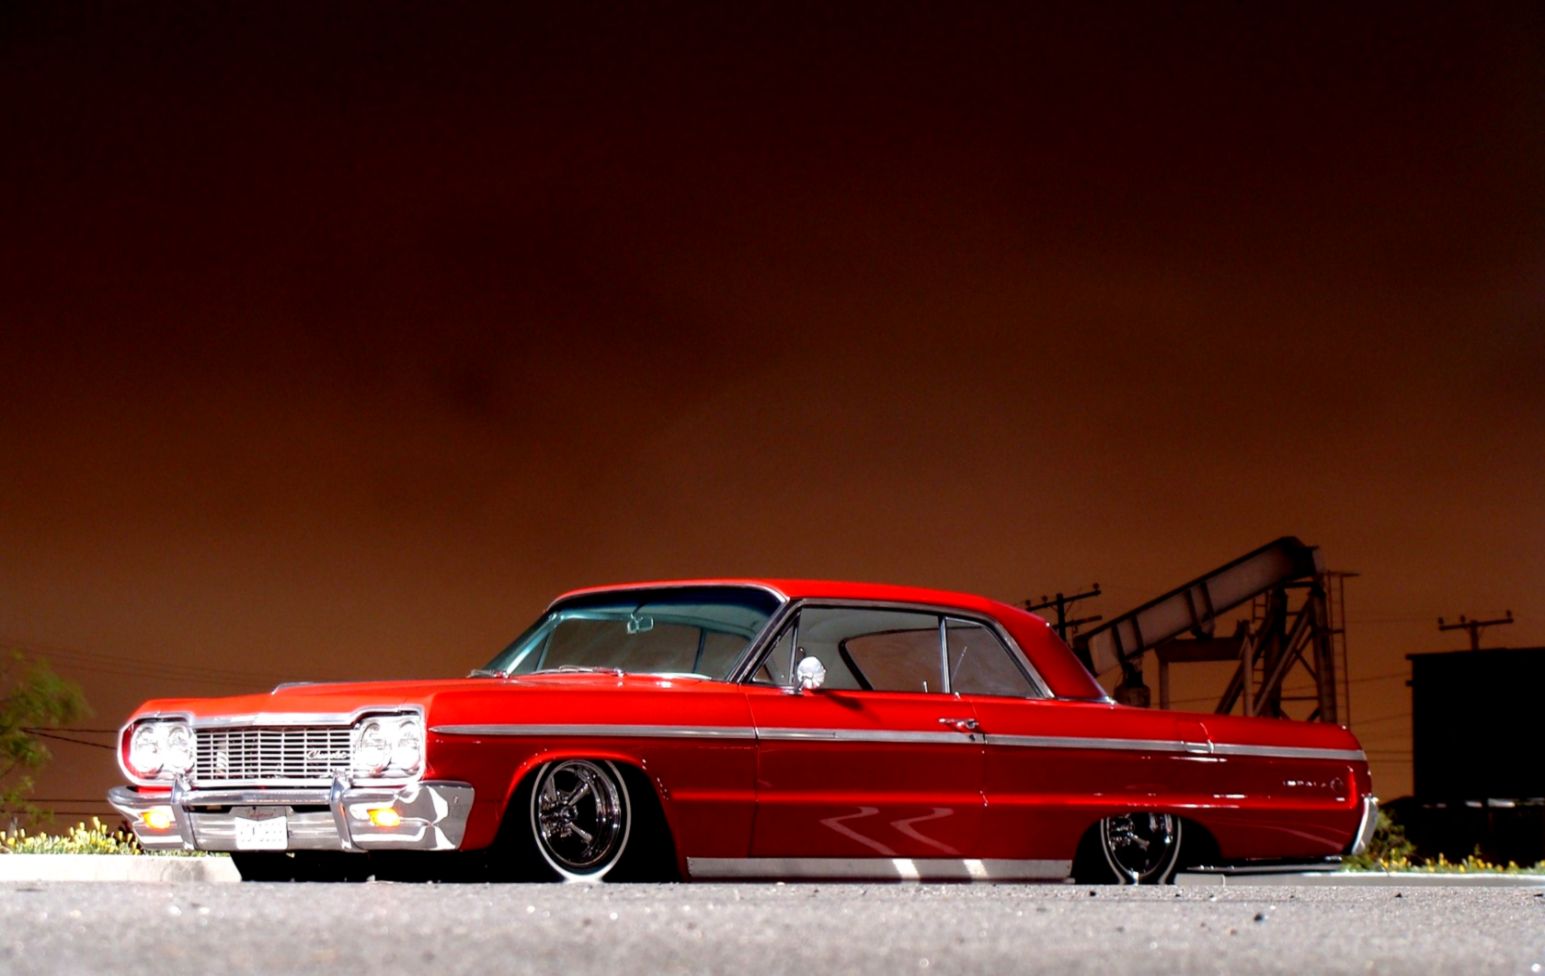 Lowrider Wallpaper And Background Image Id303066 - Lowrider Cars Wallpapers Hd - HD Wallpaper 